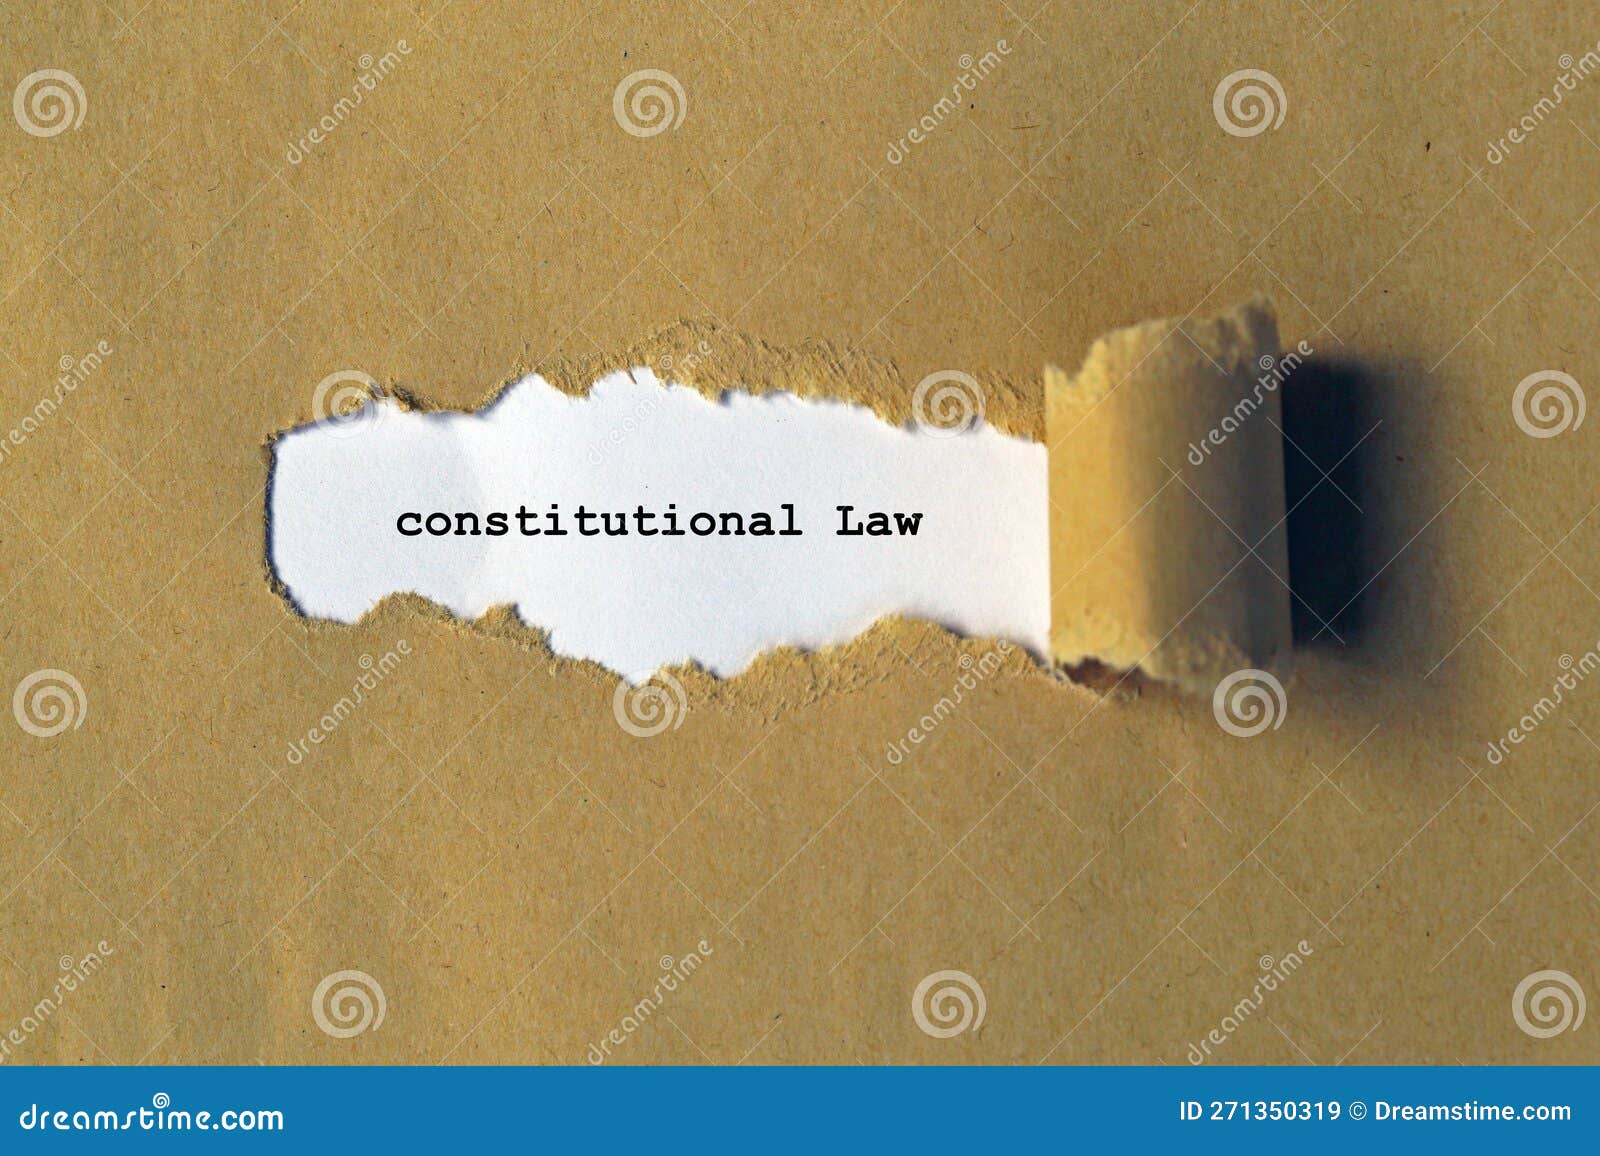 constitutional law on paper